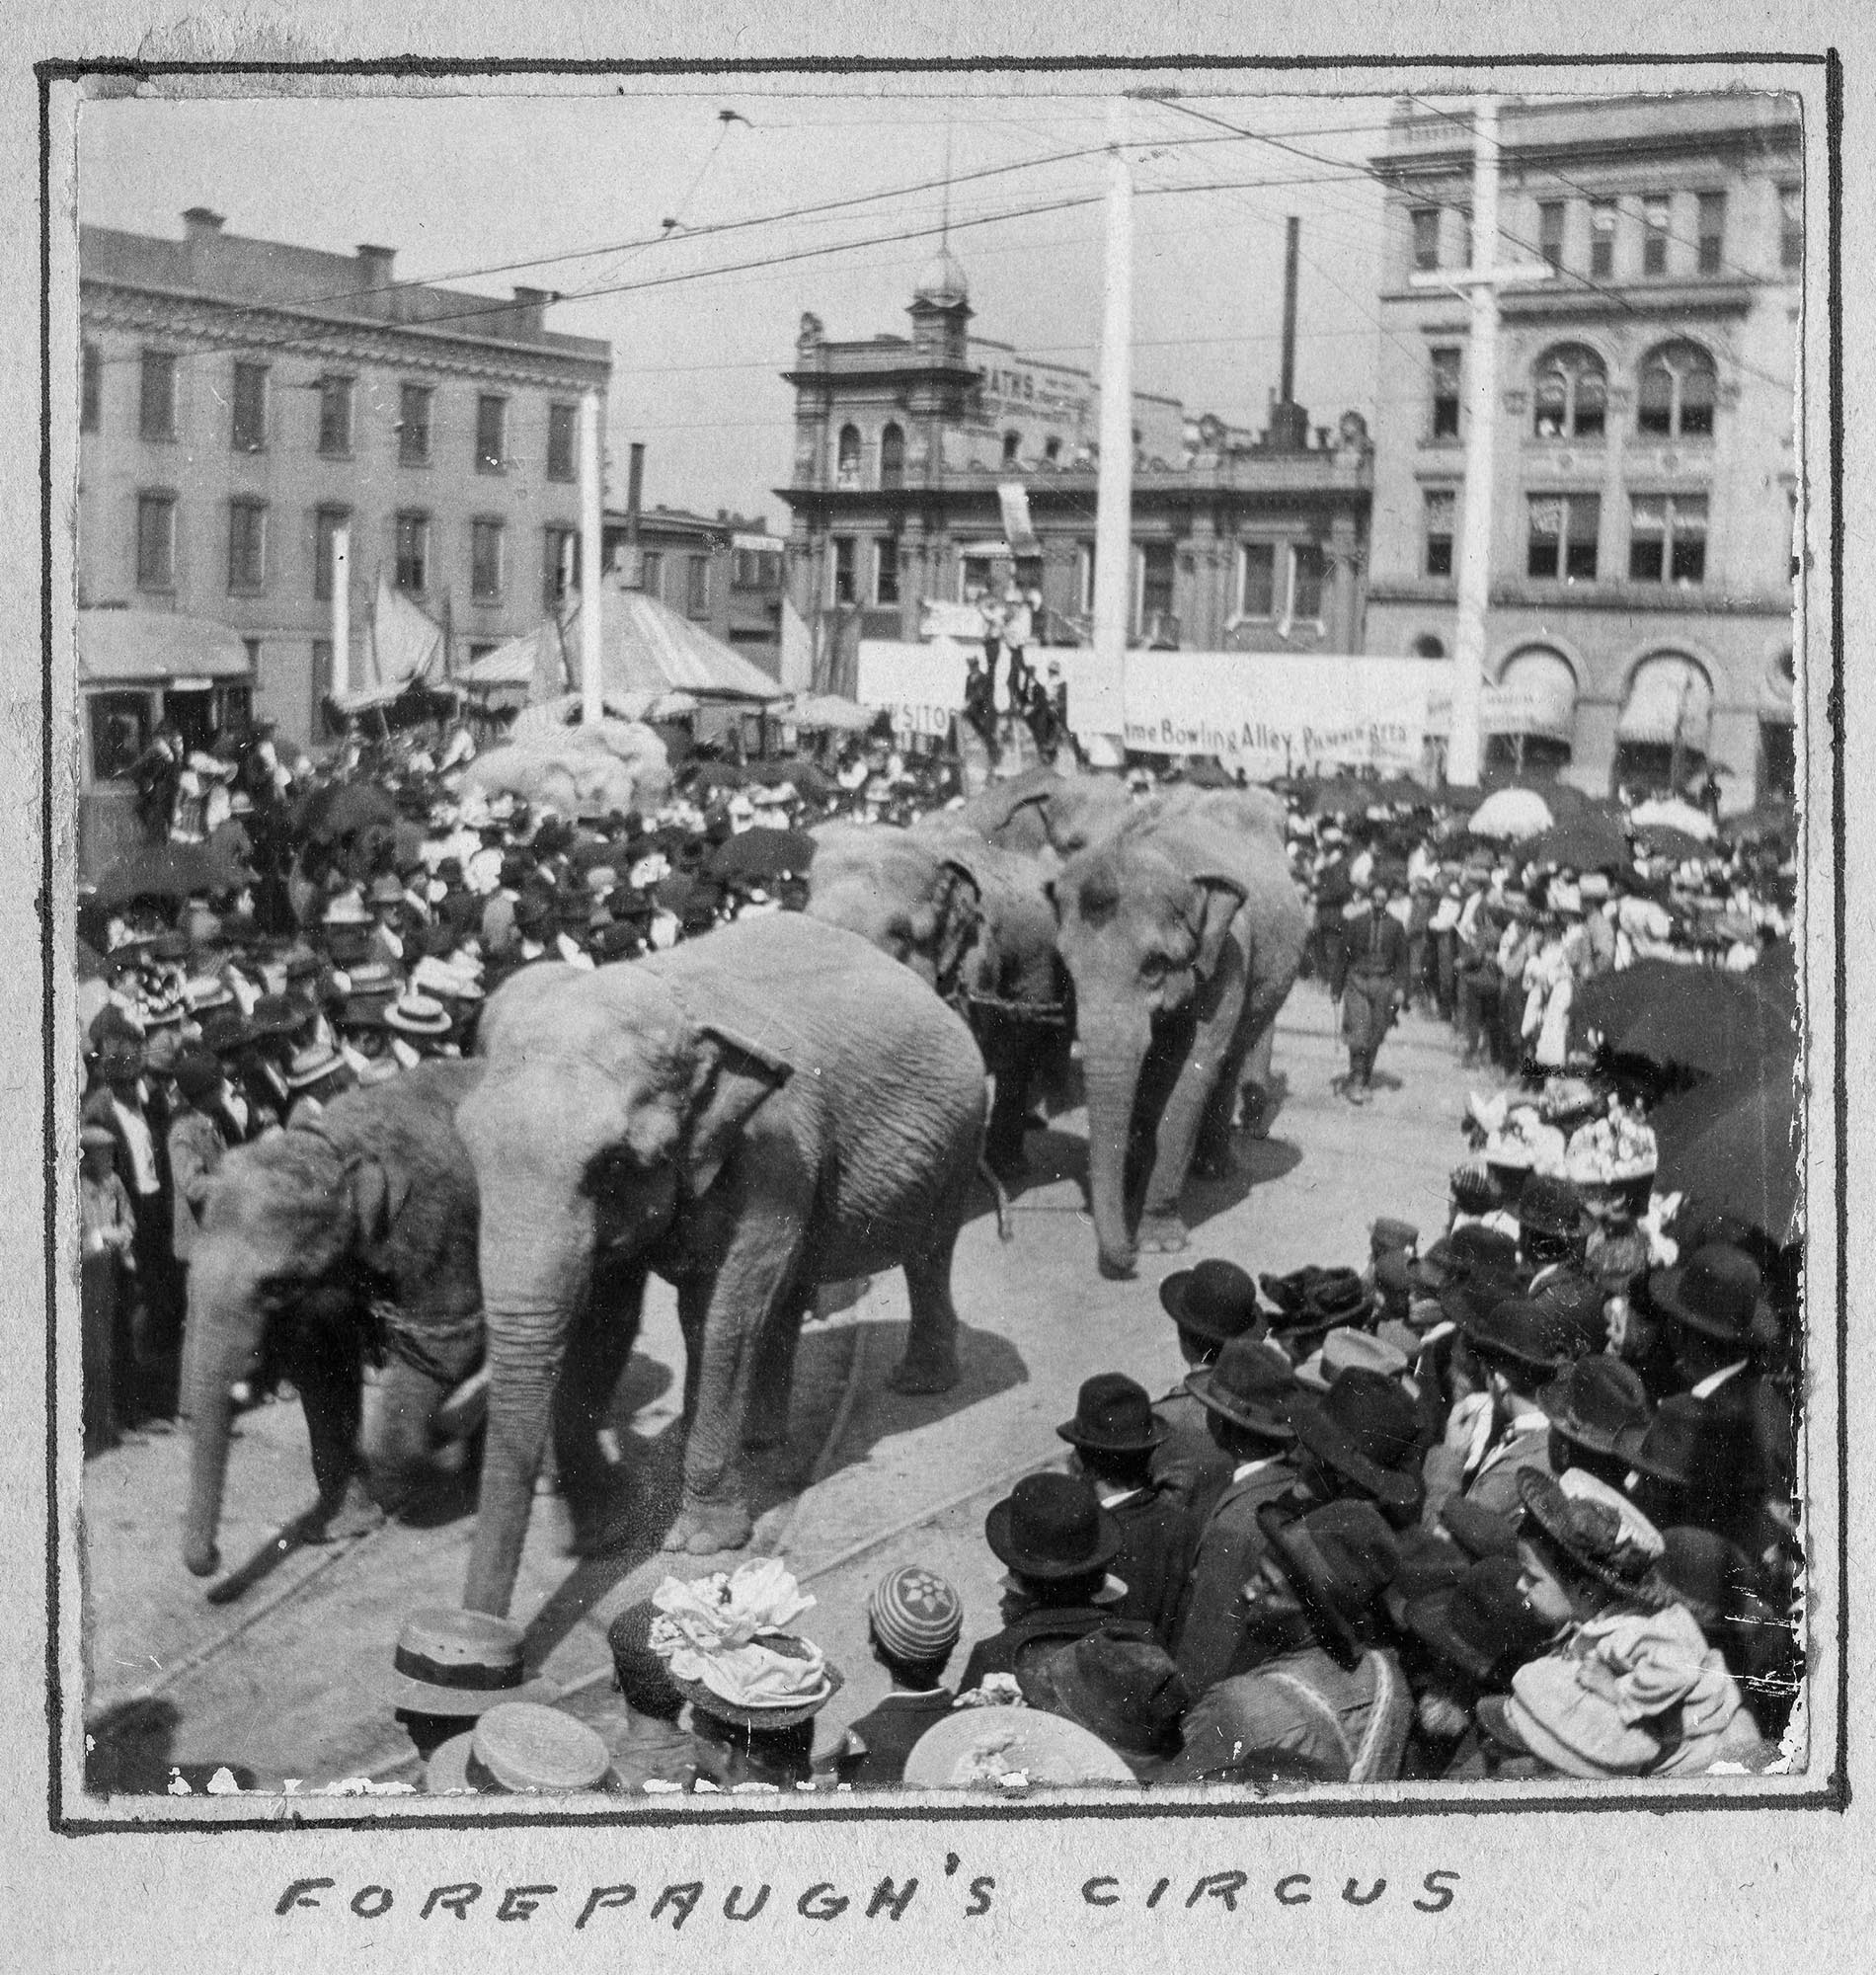 Adam Forepaugh's Circus, at the Great Street Faire, Belleville, Illinois, 1901.

Photo taken by Samuel Peake Hyde, b. Feb 17, 1850, St. Francisville, Clark, Missouri; d. April 28, 1921, Belleville, St. Clair, Illinois., son of Edwin C. Hyde and Elizabeth Hyde. Samuel was a clerk for J. G. Green Company, 1867, and then worked with his father at E.C. Hyde & Co., Storage and Commission, 4 South Commercial Street, Belleville, IL. Sam resided at 37 North Douglas, Belleville.